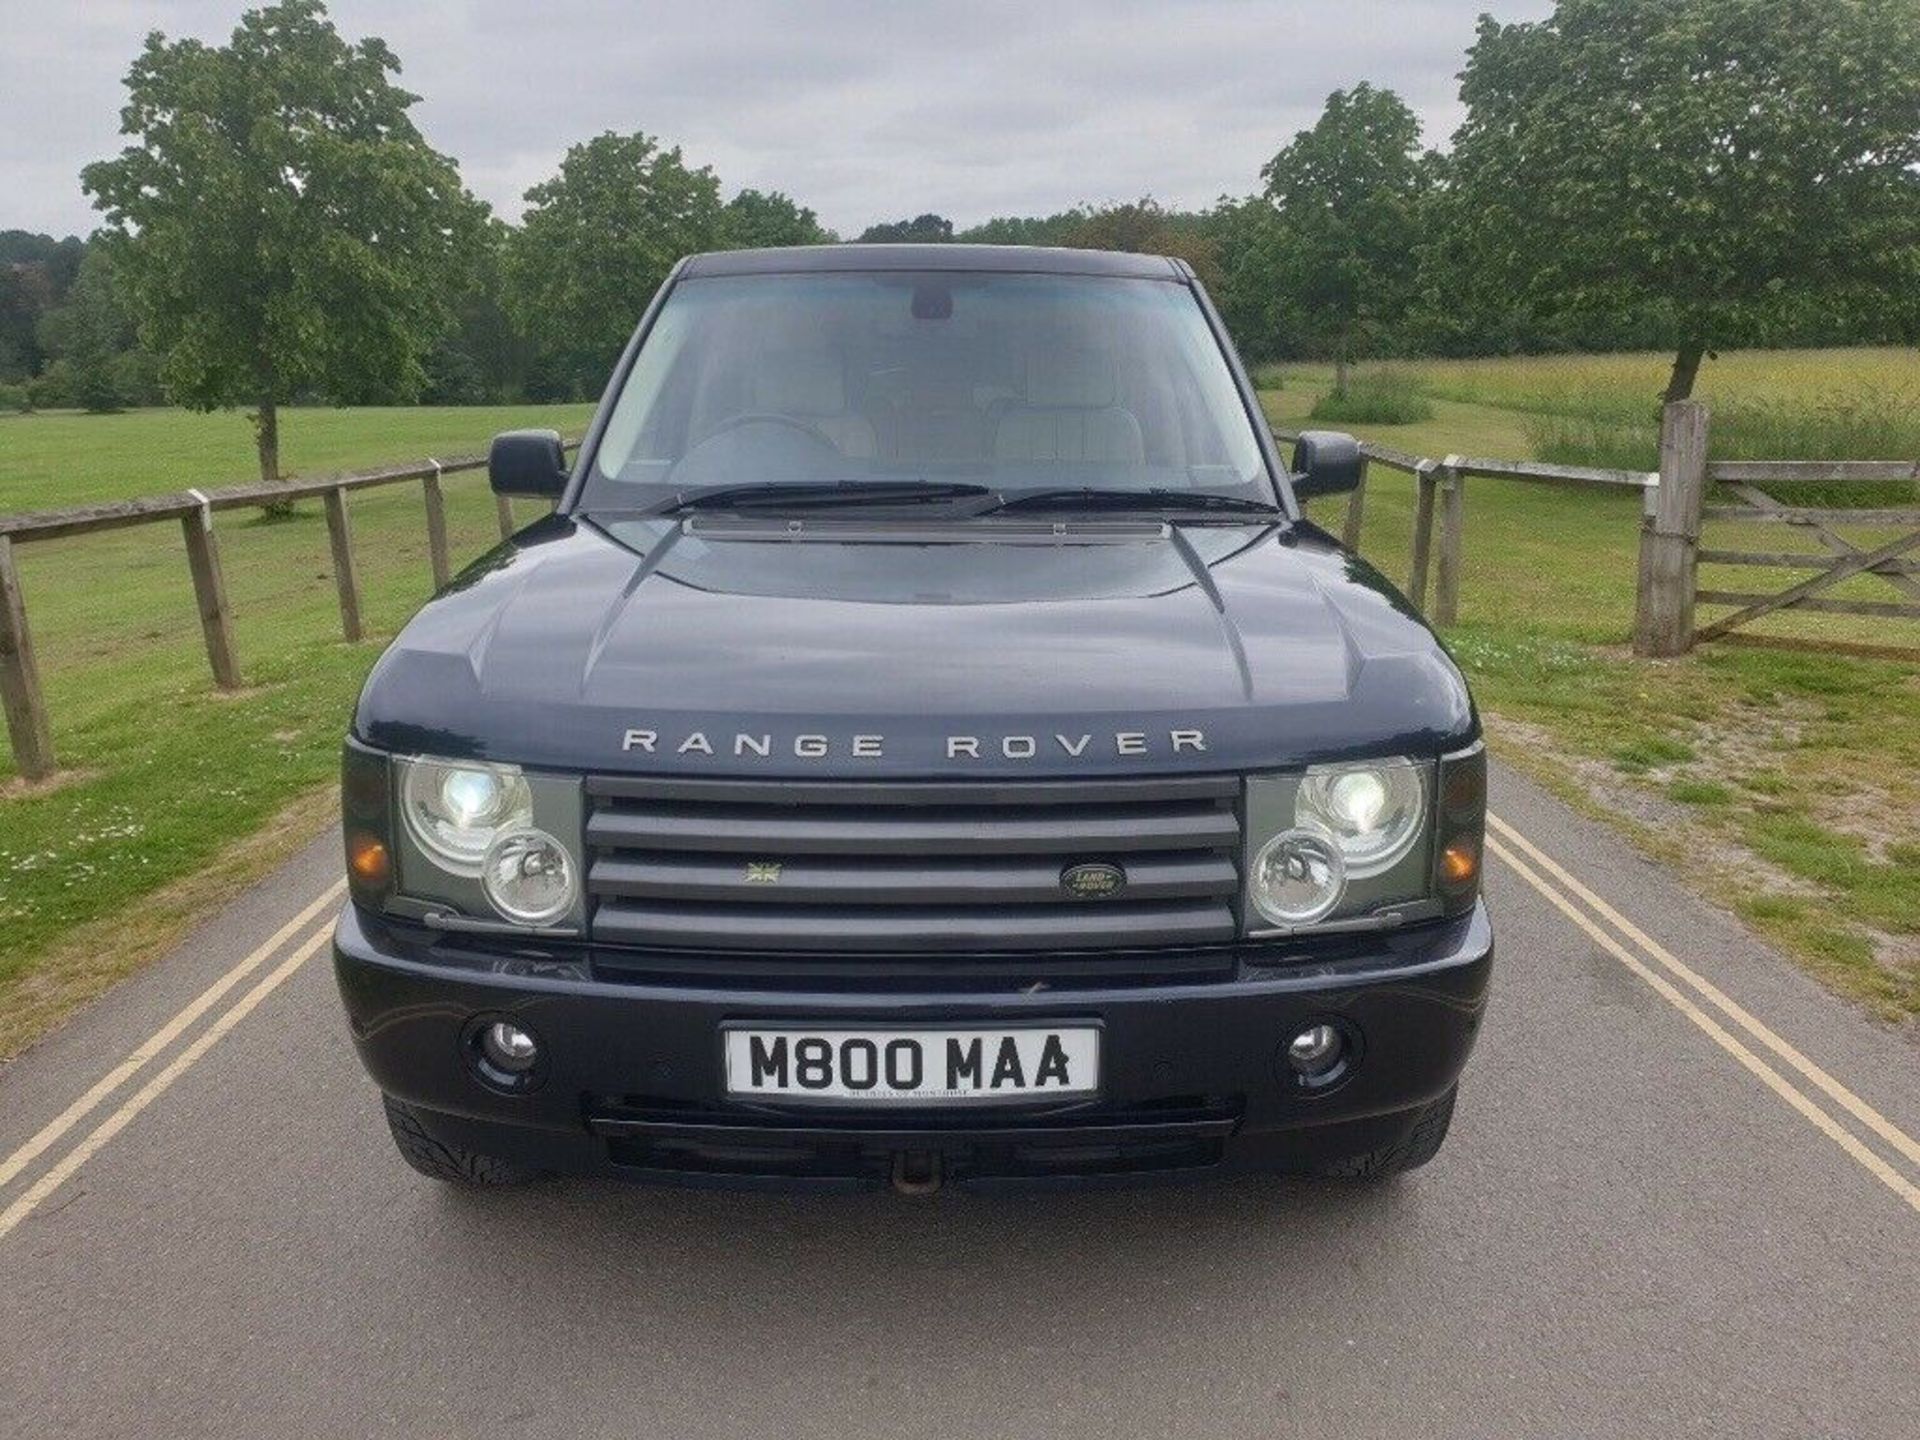 2002/02 REG LAND ROVER RANGE ROVER VOGUE V8 4X4 WITH LPG GAS CONVERSION & CERTIFICATE *NO VAT* - Image 2 of 9